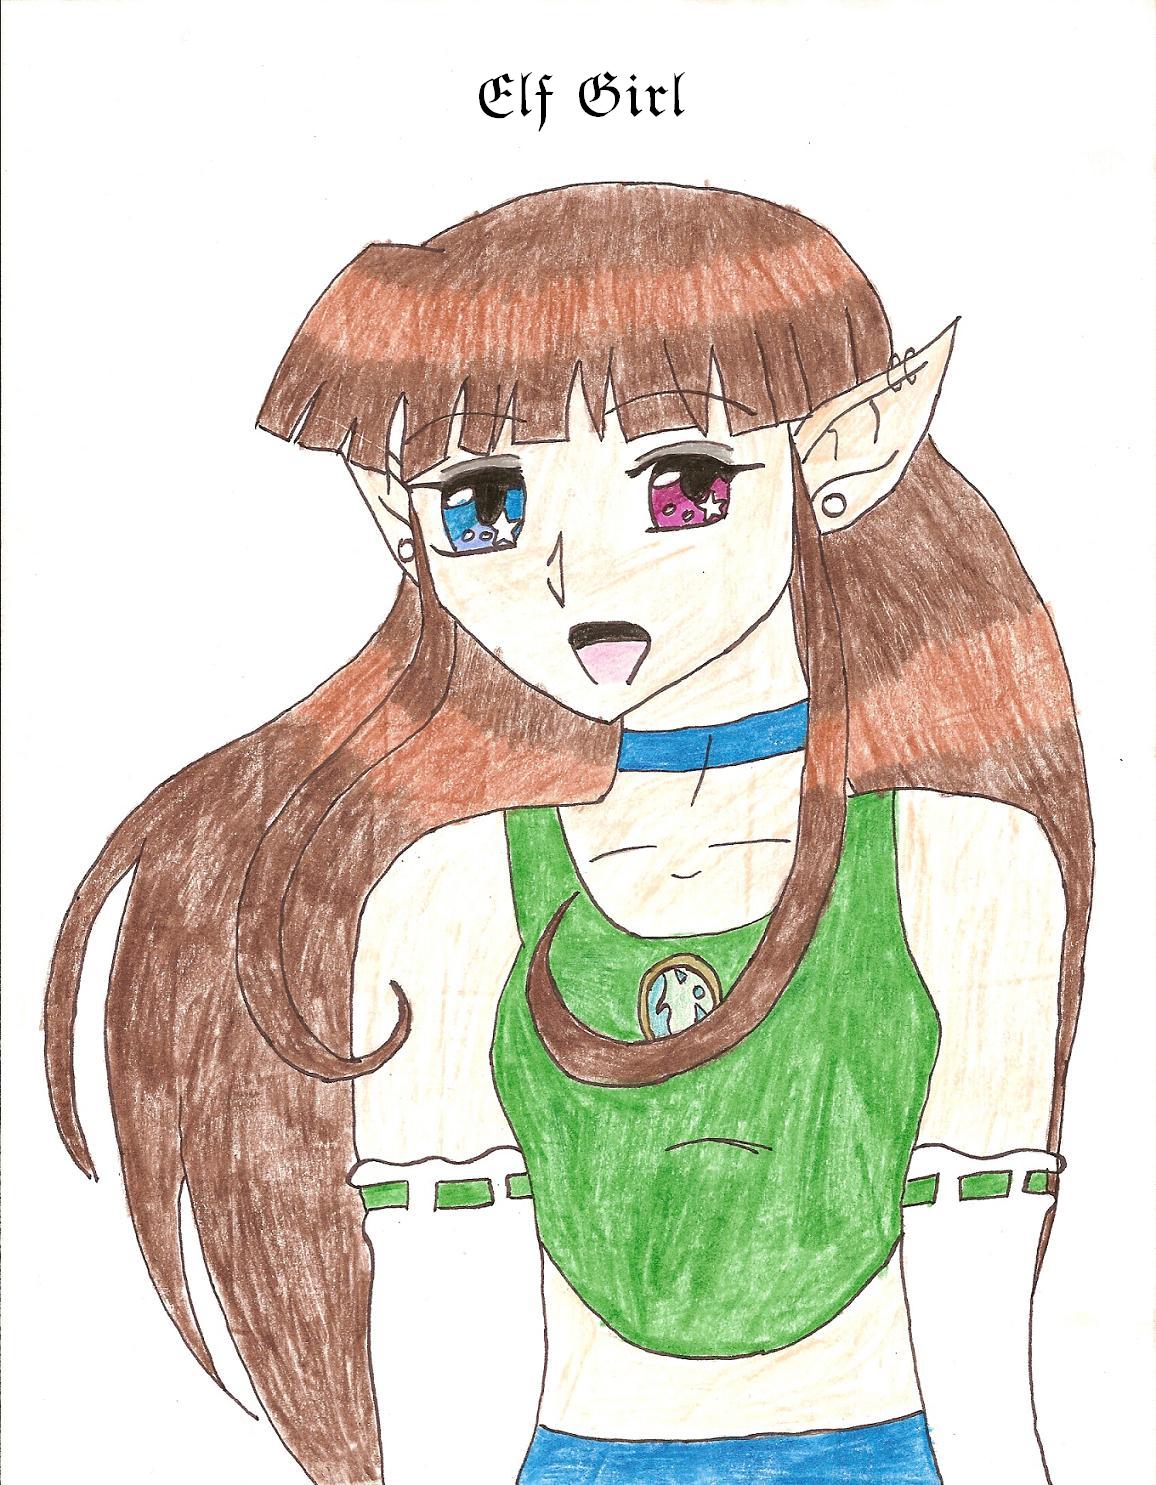 Elf Girl(colored) by Animeiskewlbecauseisaidso